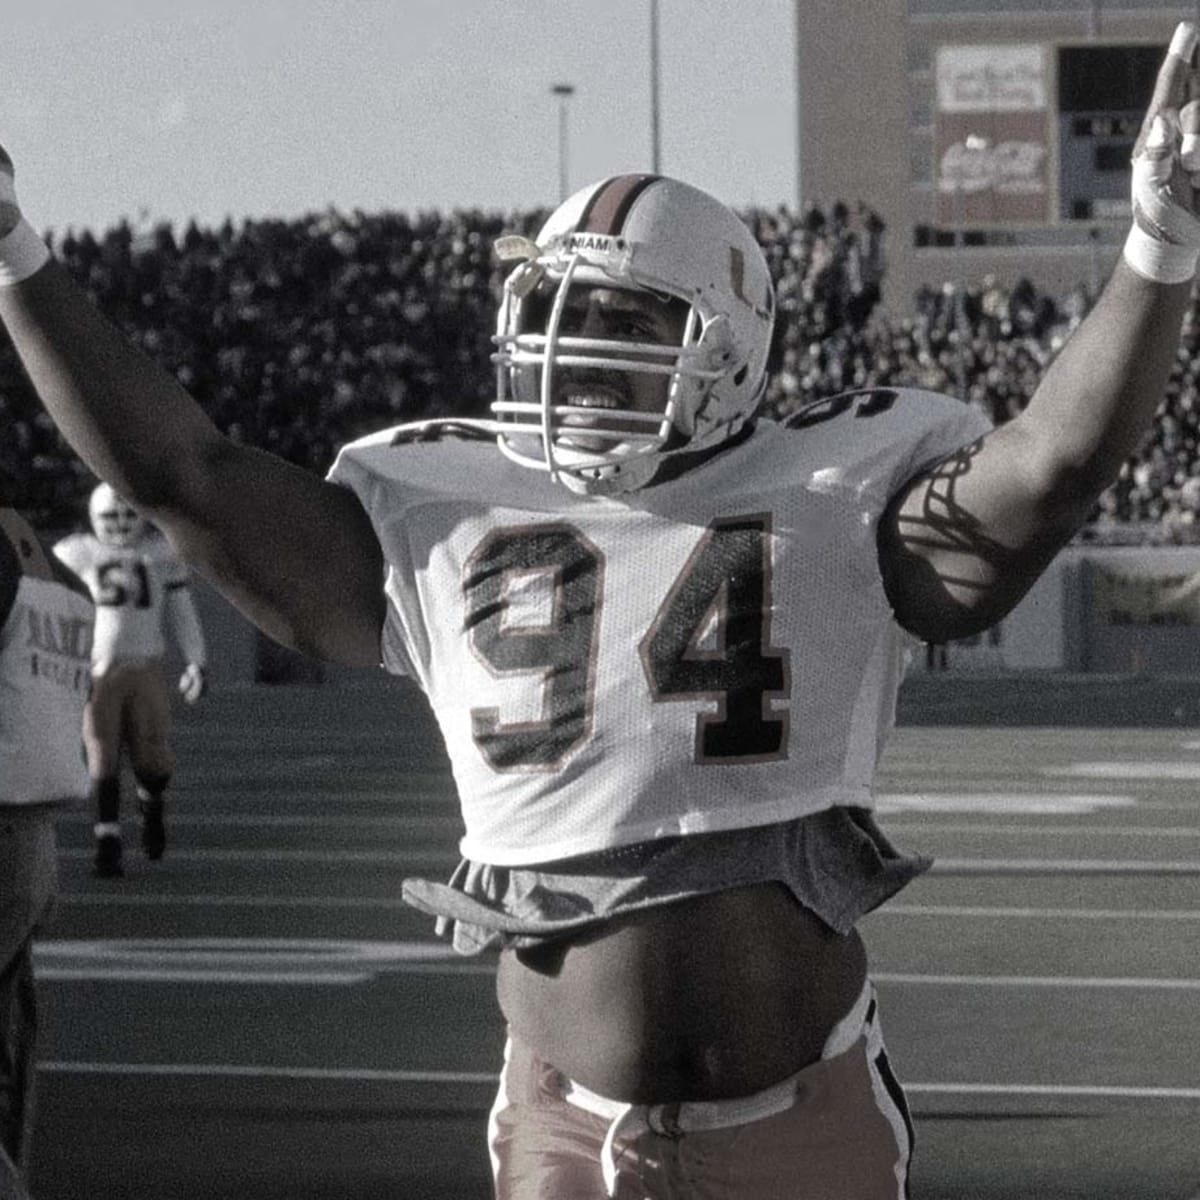 Warren Sapp of the Miami Hurricanes gets ready to move at the snap